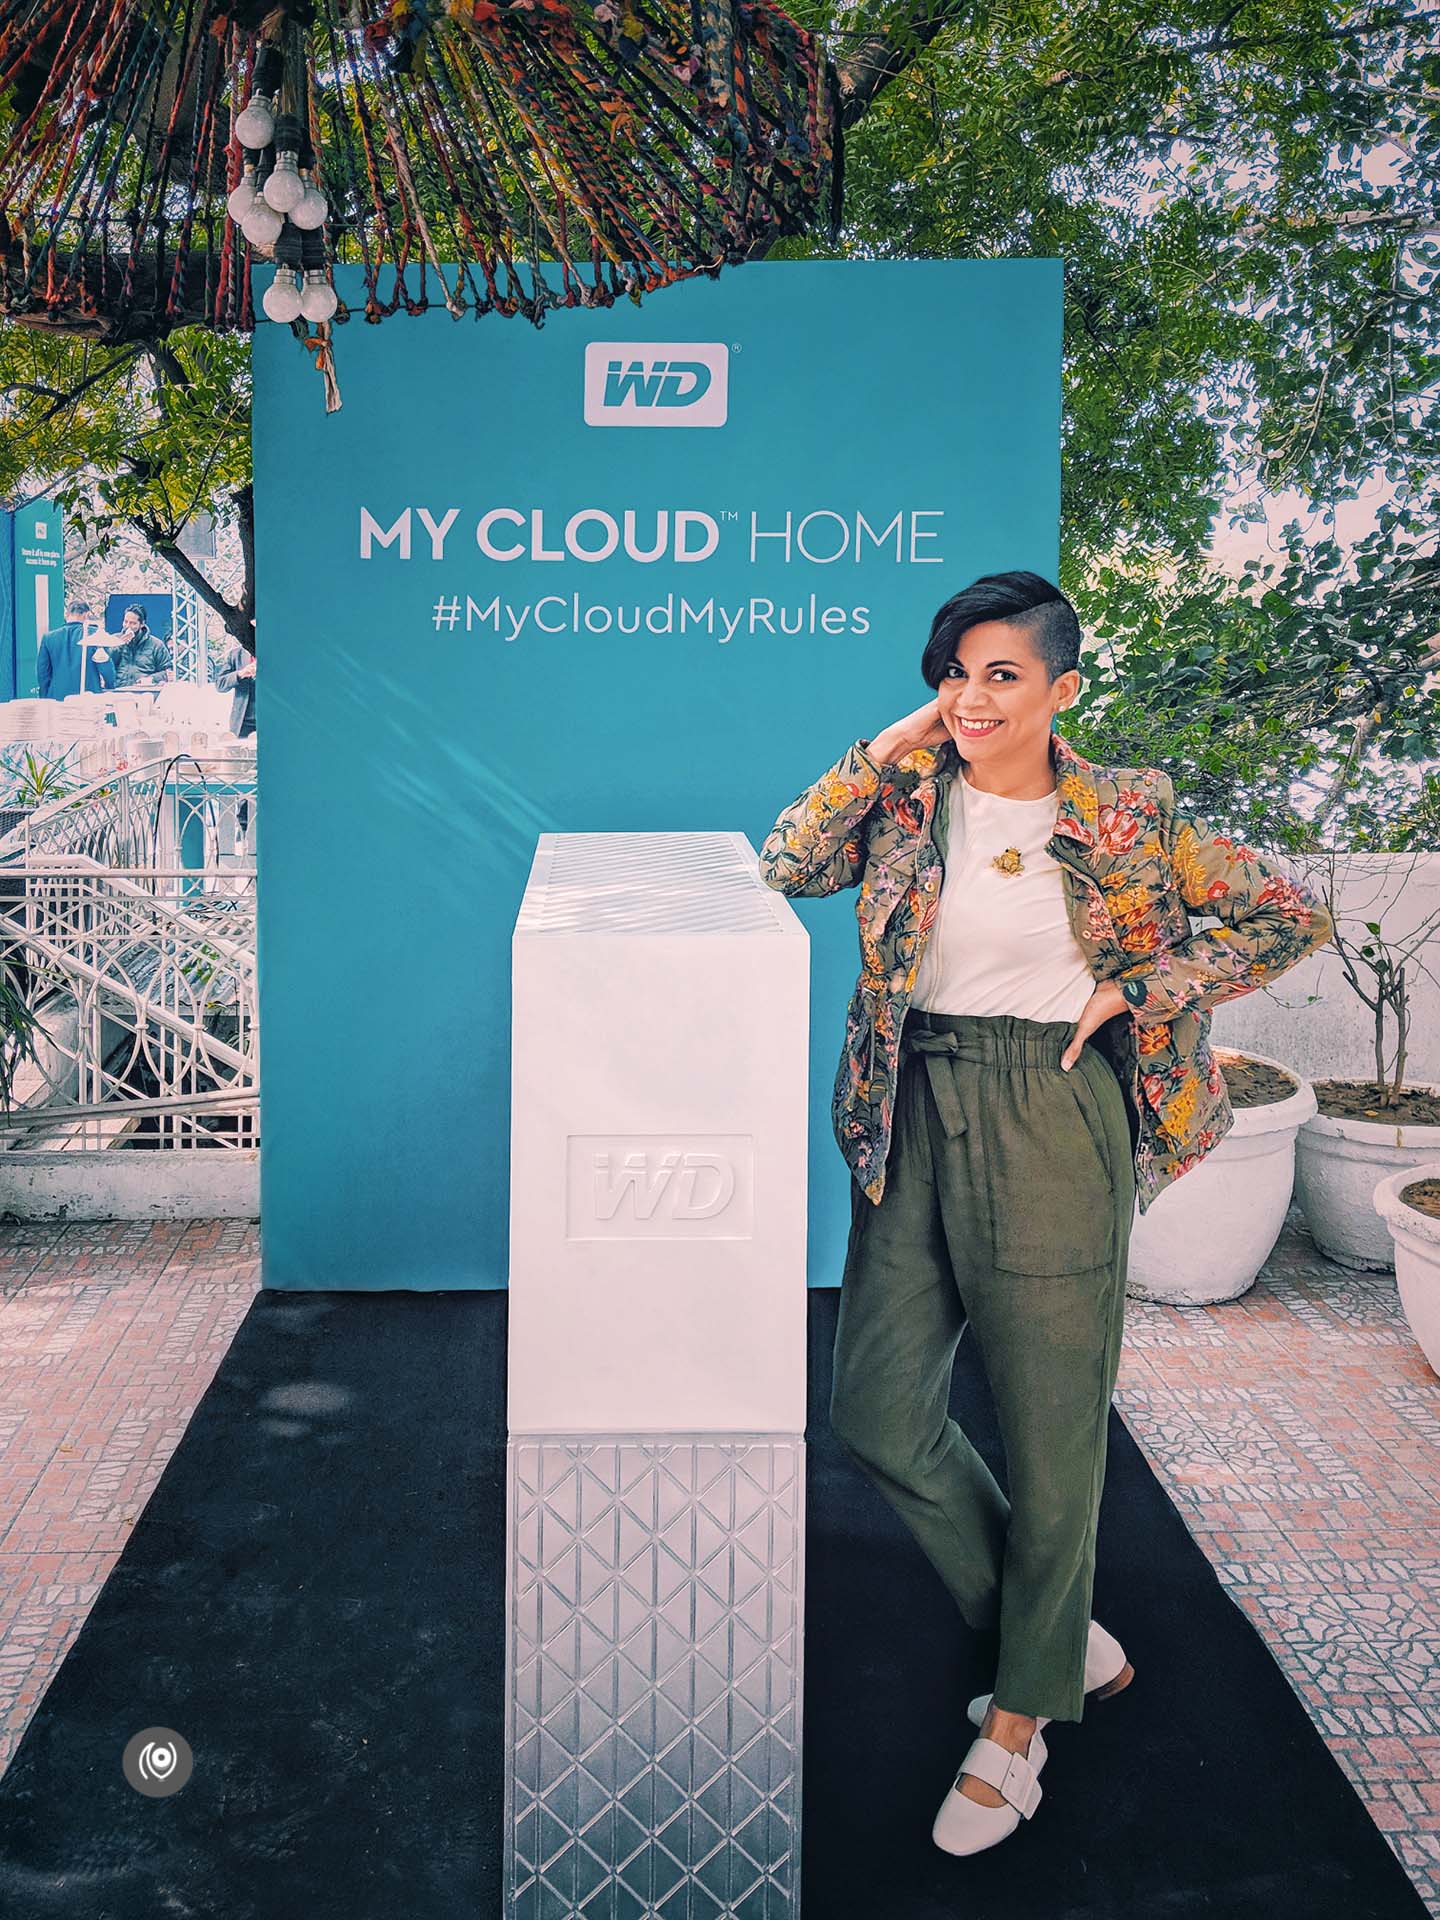 Naina.co, EyesForTechnology, Western Digital, WDCreators, MyCloudMyRules, Hard Disk Drive, Hard Drive, My Cloud Home, My Cloud Home Duo, Qutub, Olive, Launch Event, Client, New Delhi